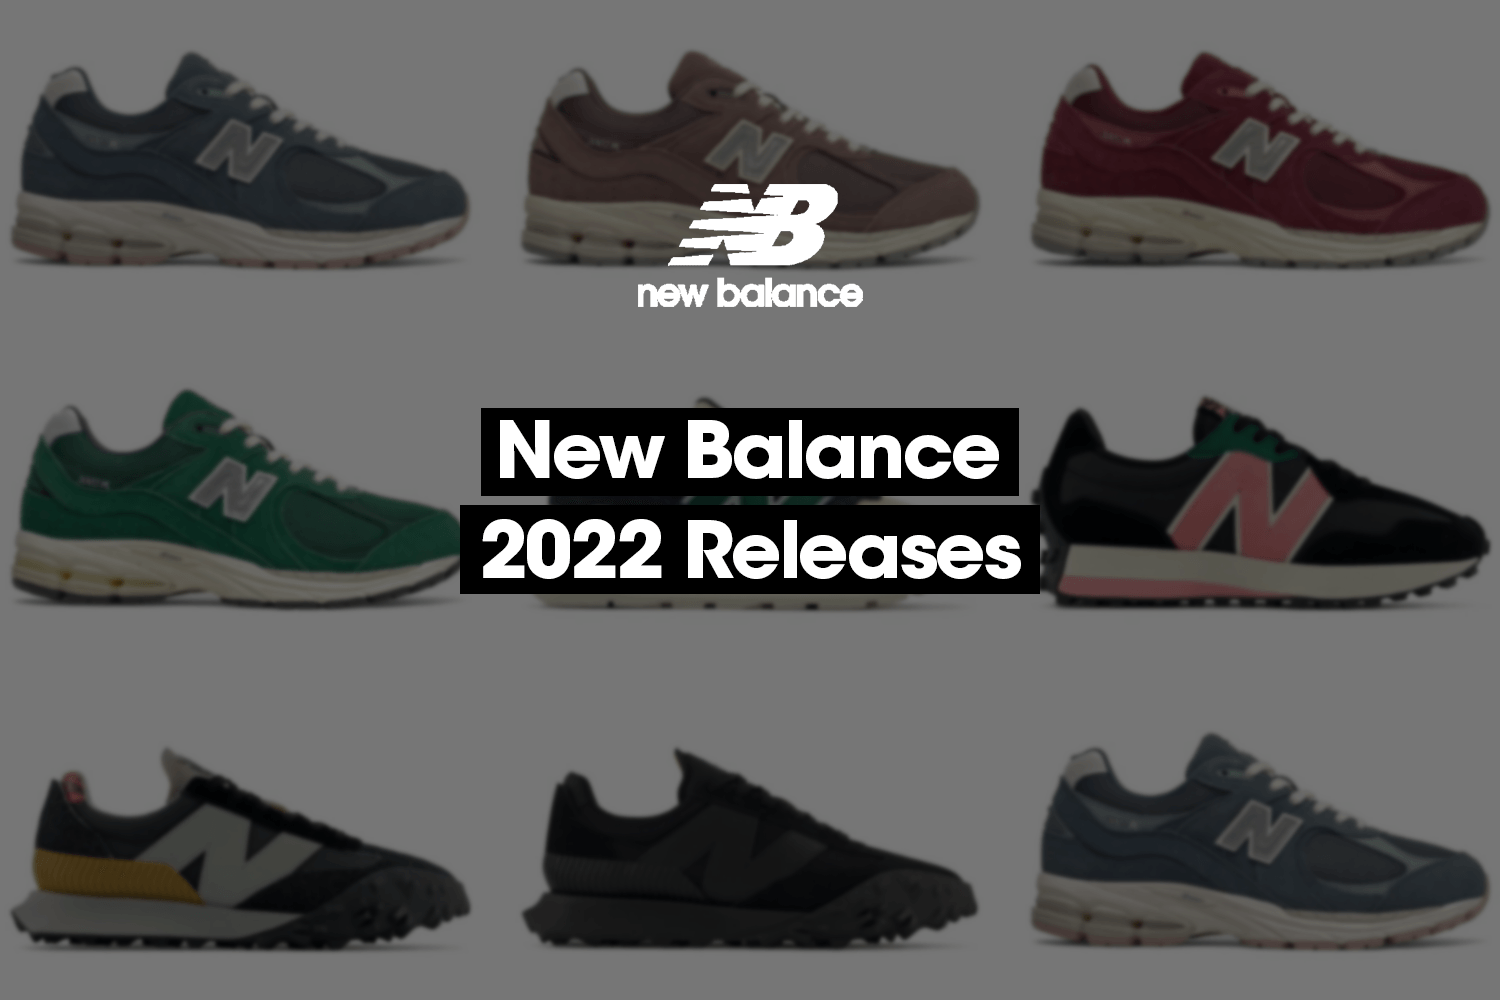 These New Balance's will release in 2022